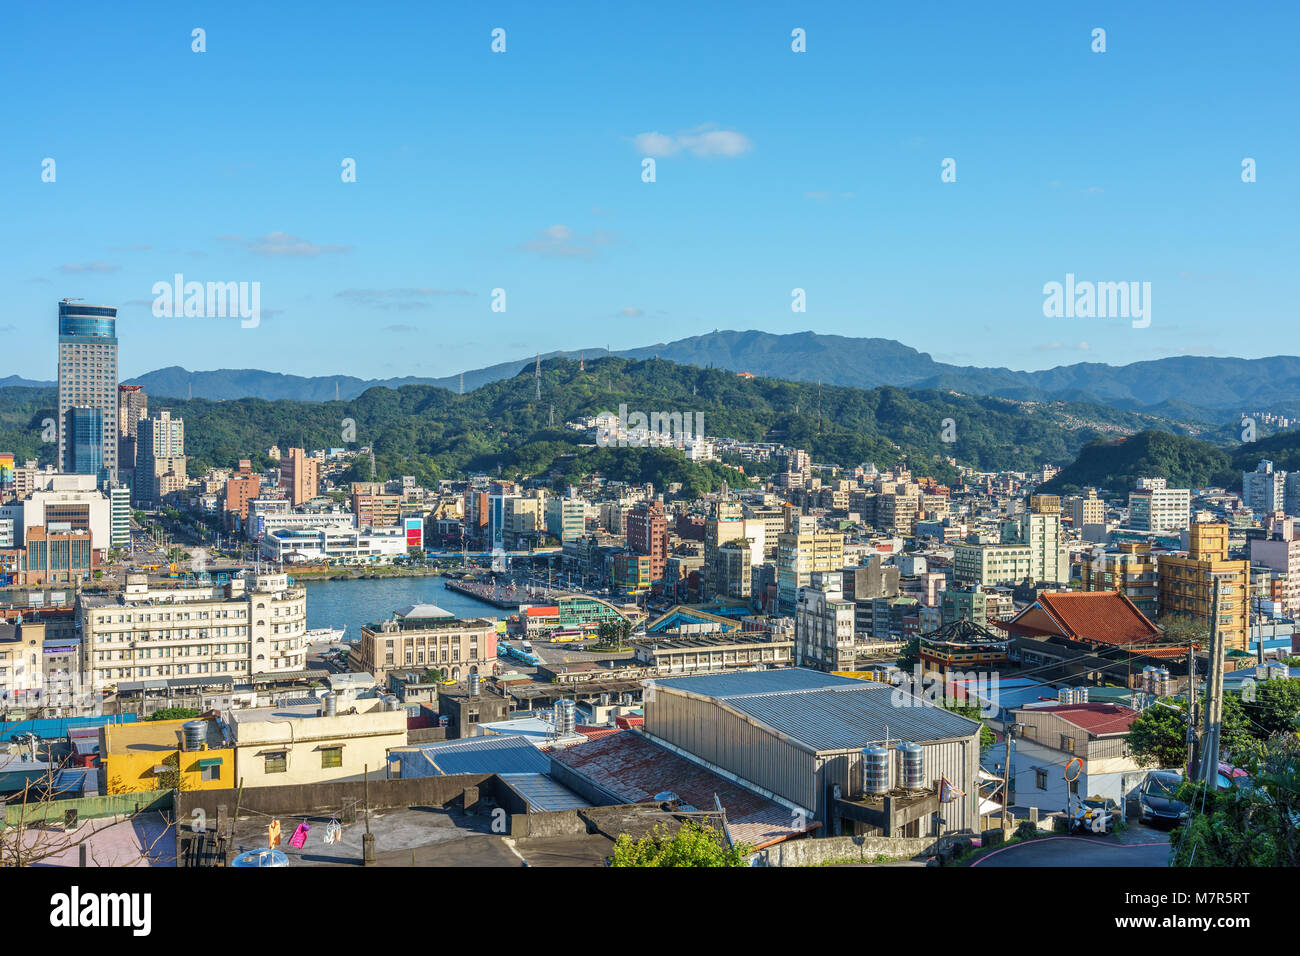 Cityscape of keelung, taiwan Stock Photo